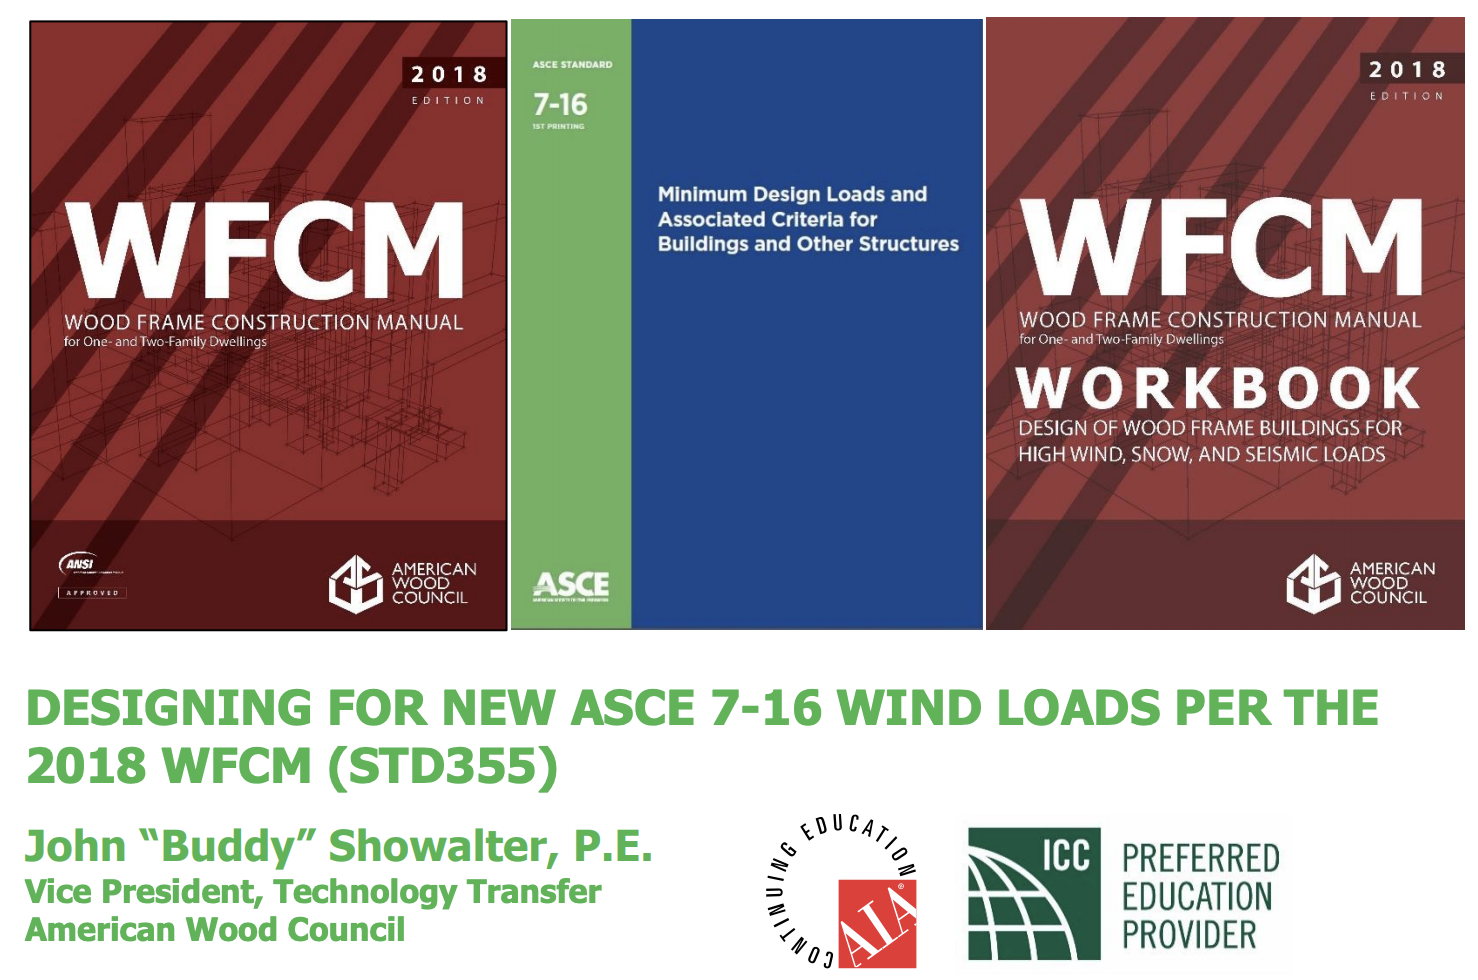 Designing for New ASCE 7-16 Wind Loads per the 2018 WFCM